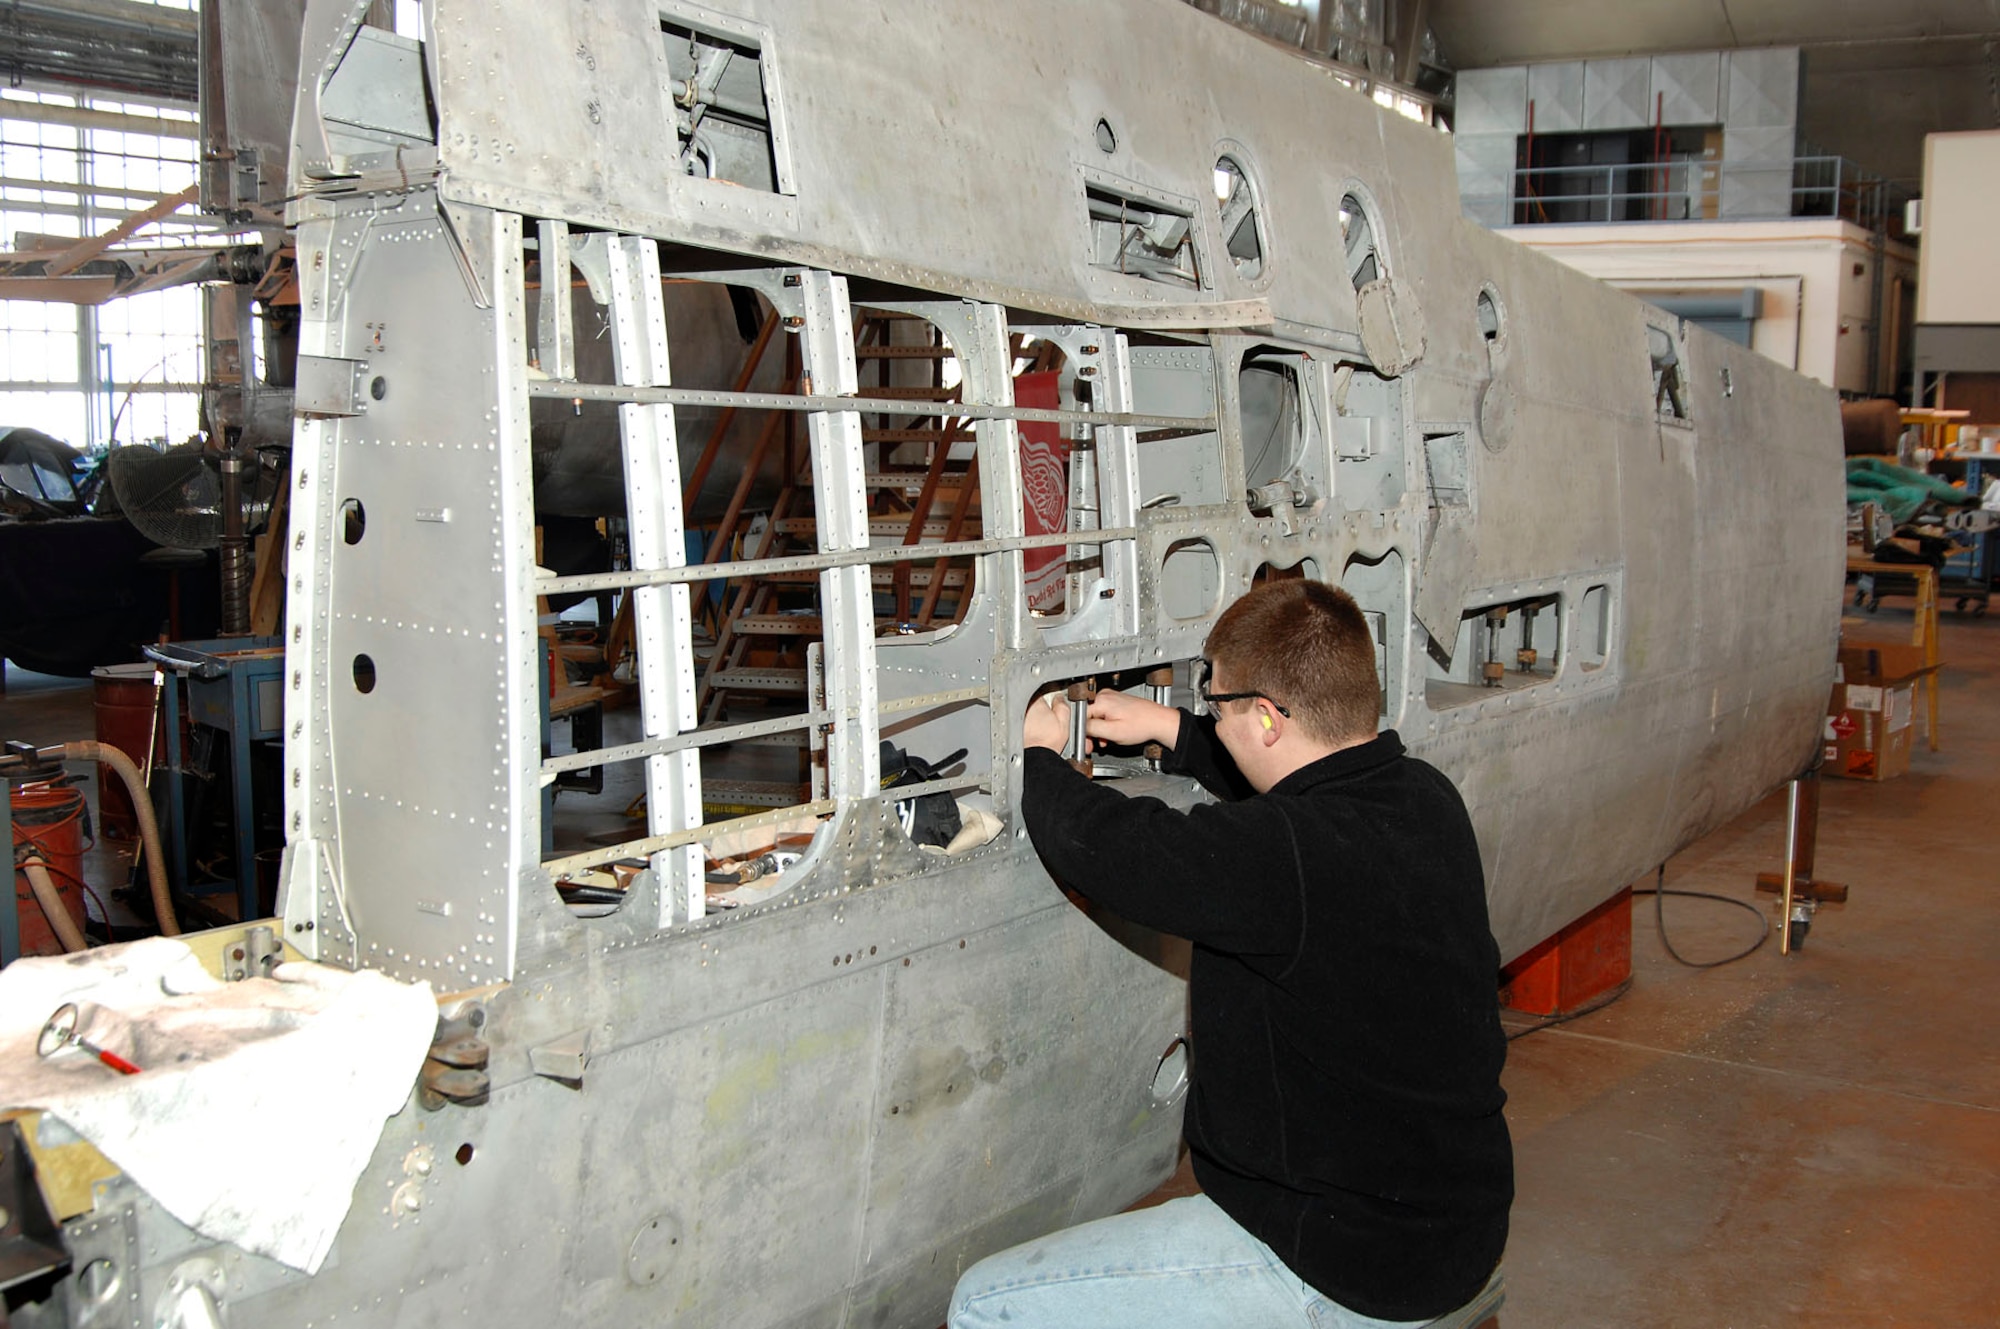 DAYTON, Ohio (02/2007) - Restoration Specialist Nick Almeter works on the Japanese George in the restoration hangar of the National Museum of the U.S. Air Force. (U.S. Air Force photo by Ben Strasser)